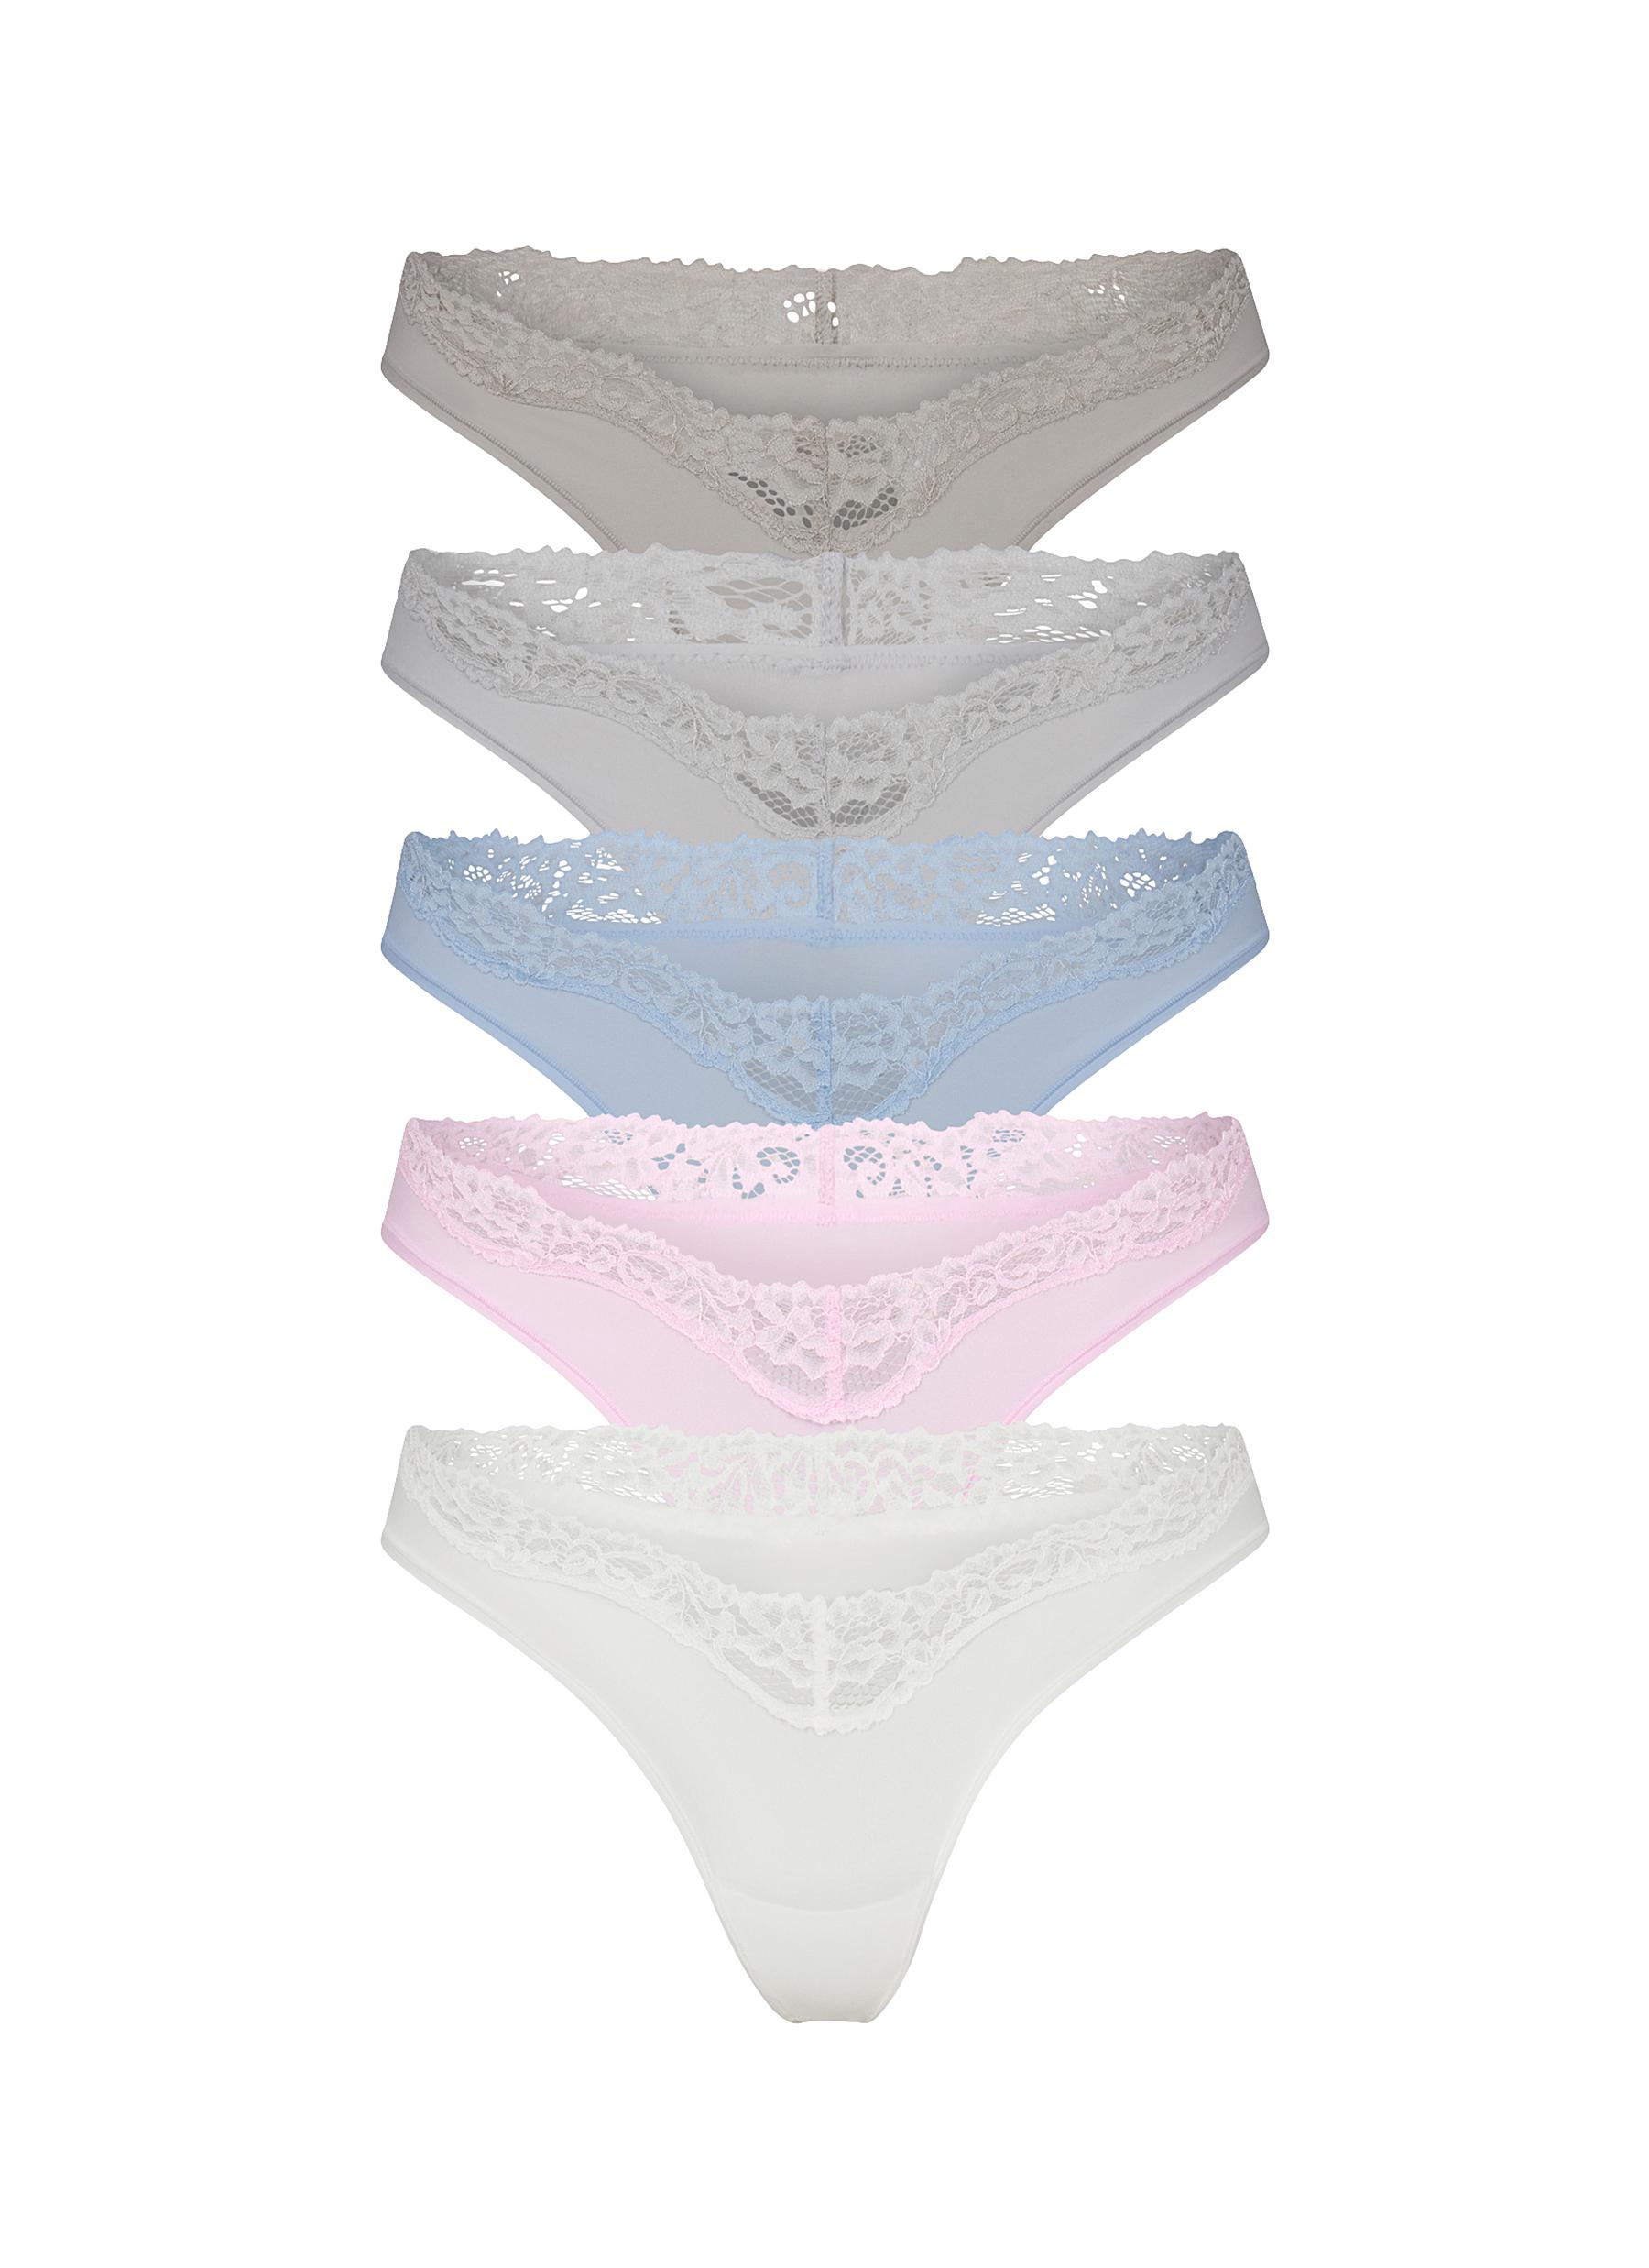 The Summer Panty Guide - SKIMS